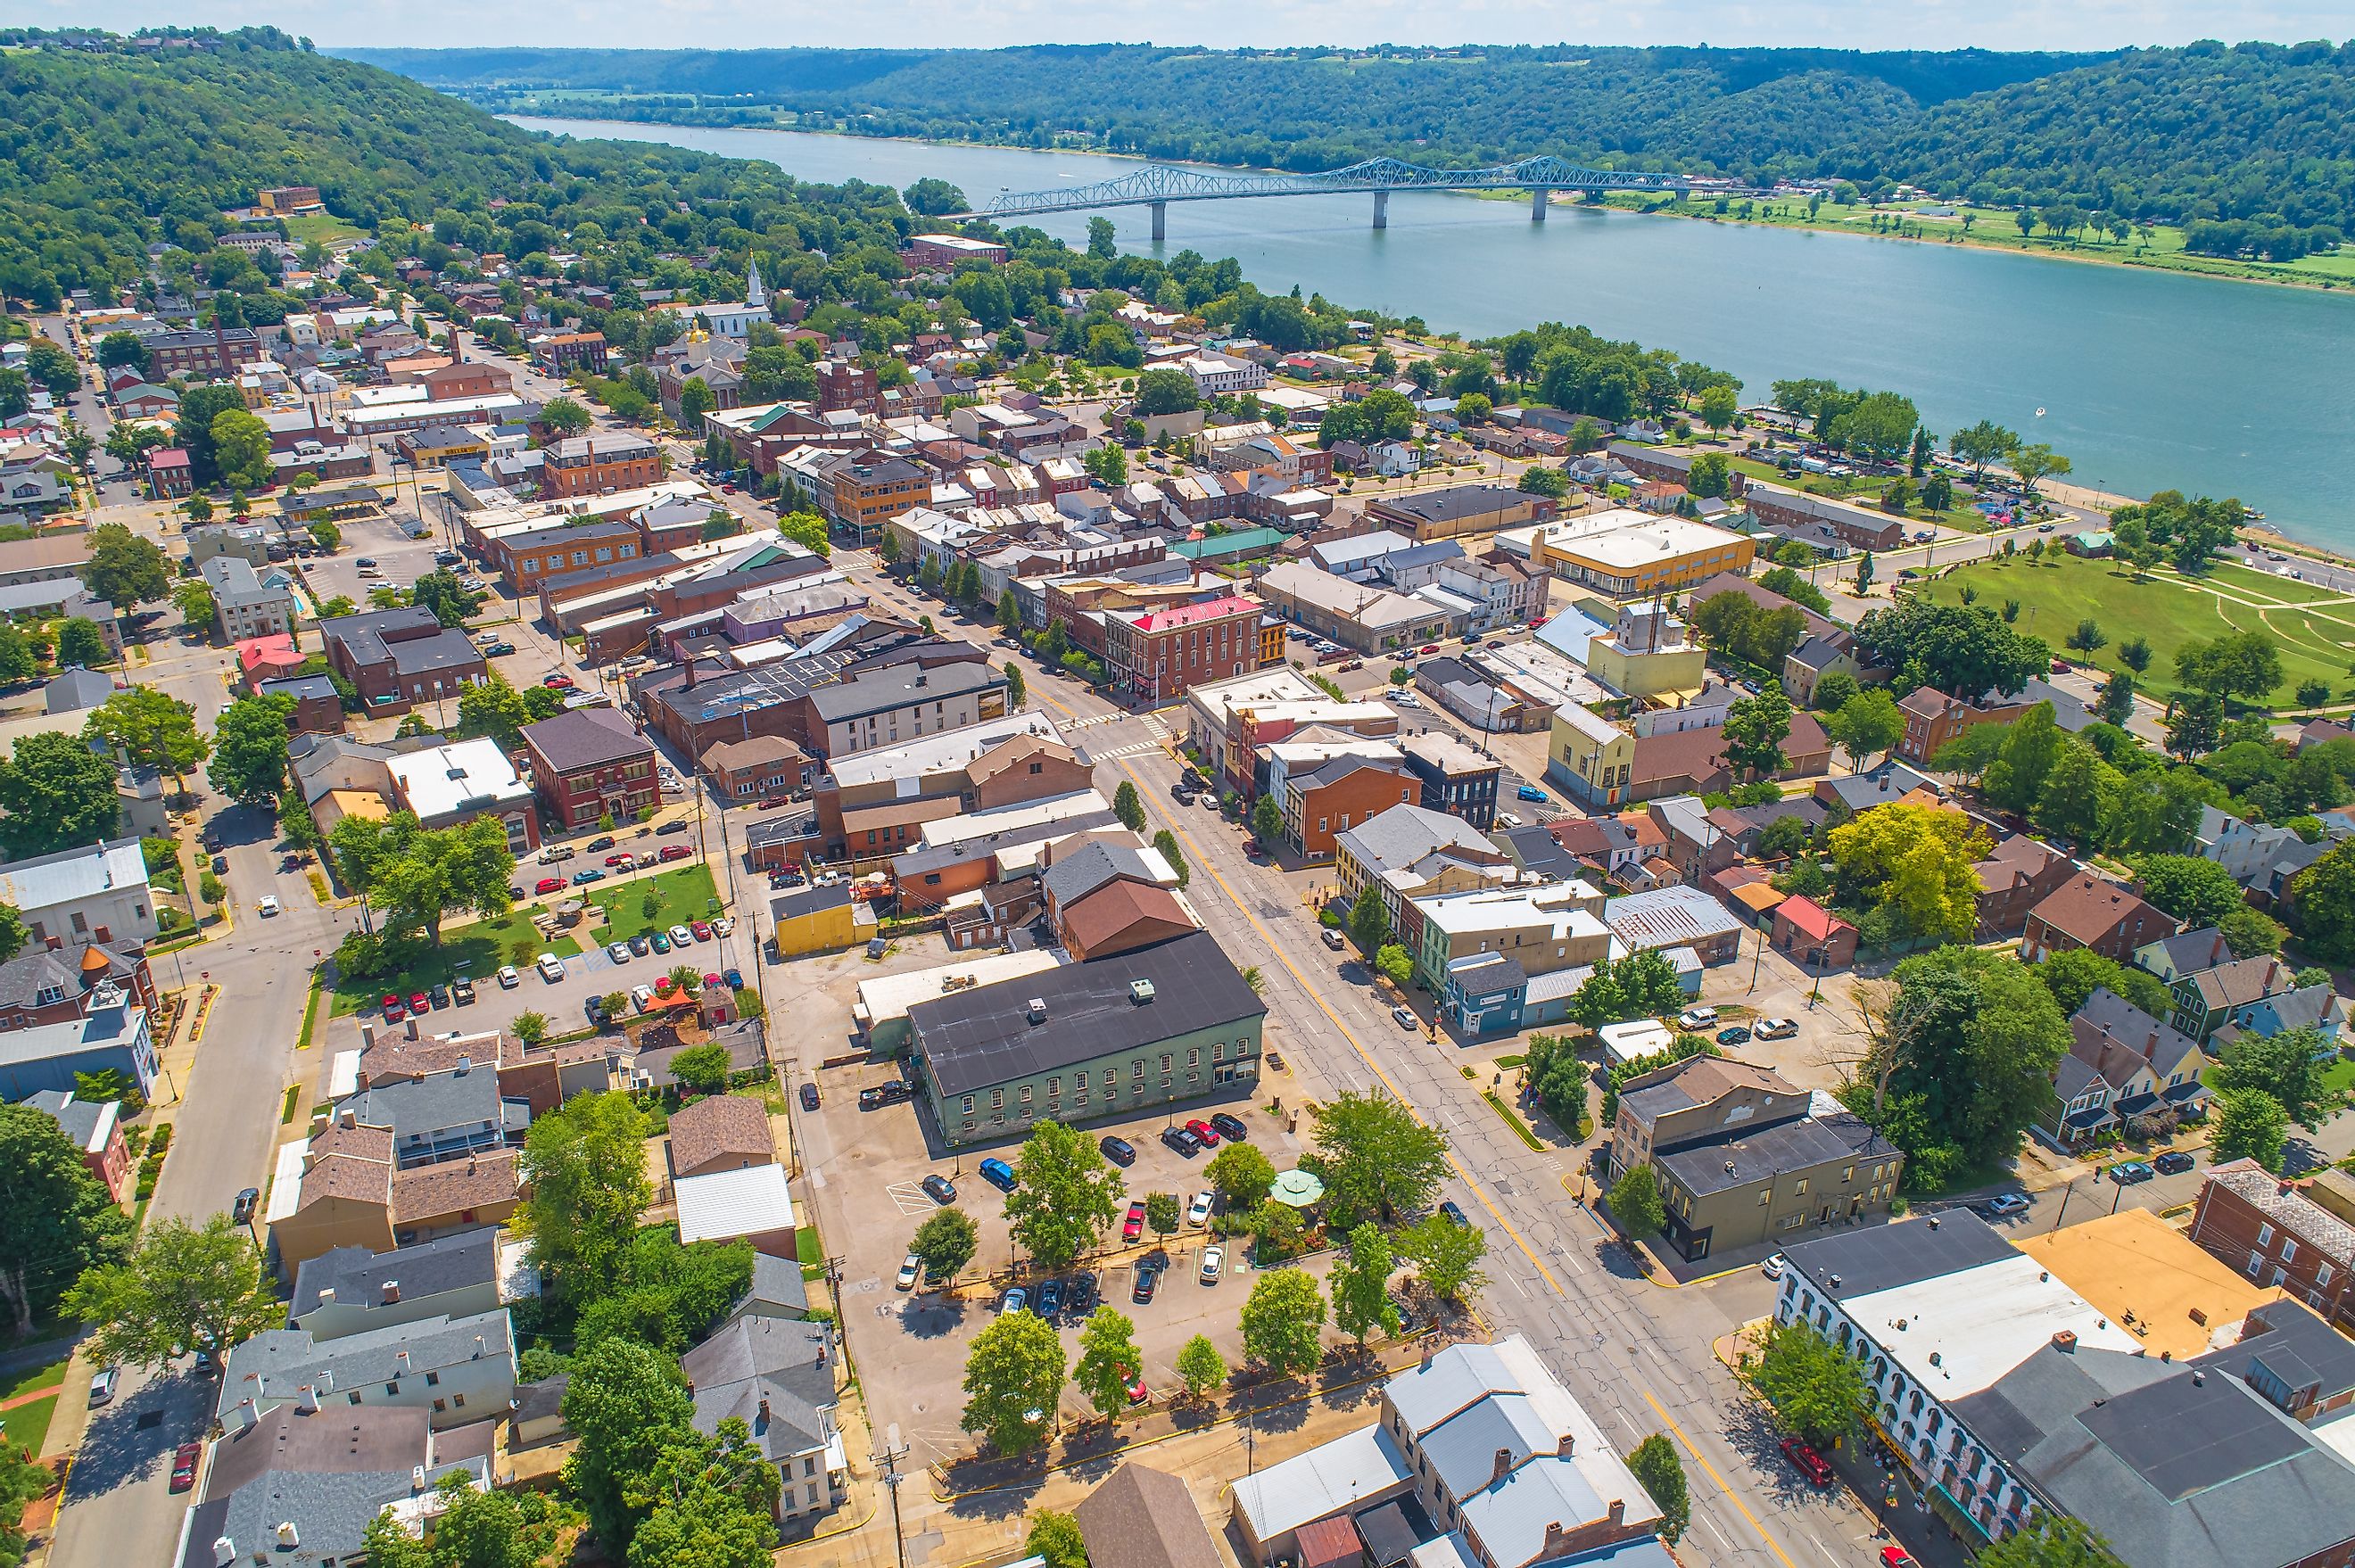 The gorgeous town of Madison, Indiana, along the Ohio River.